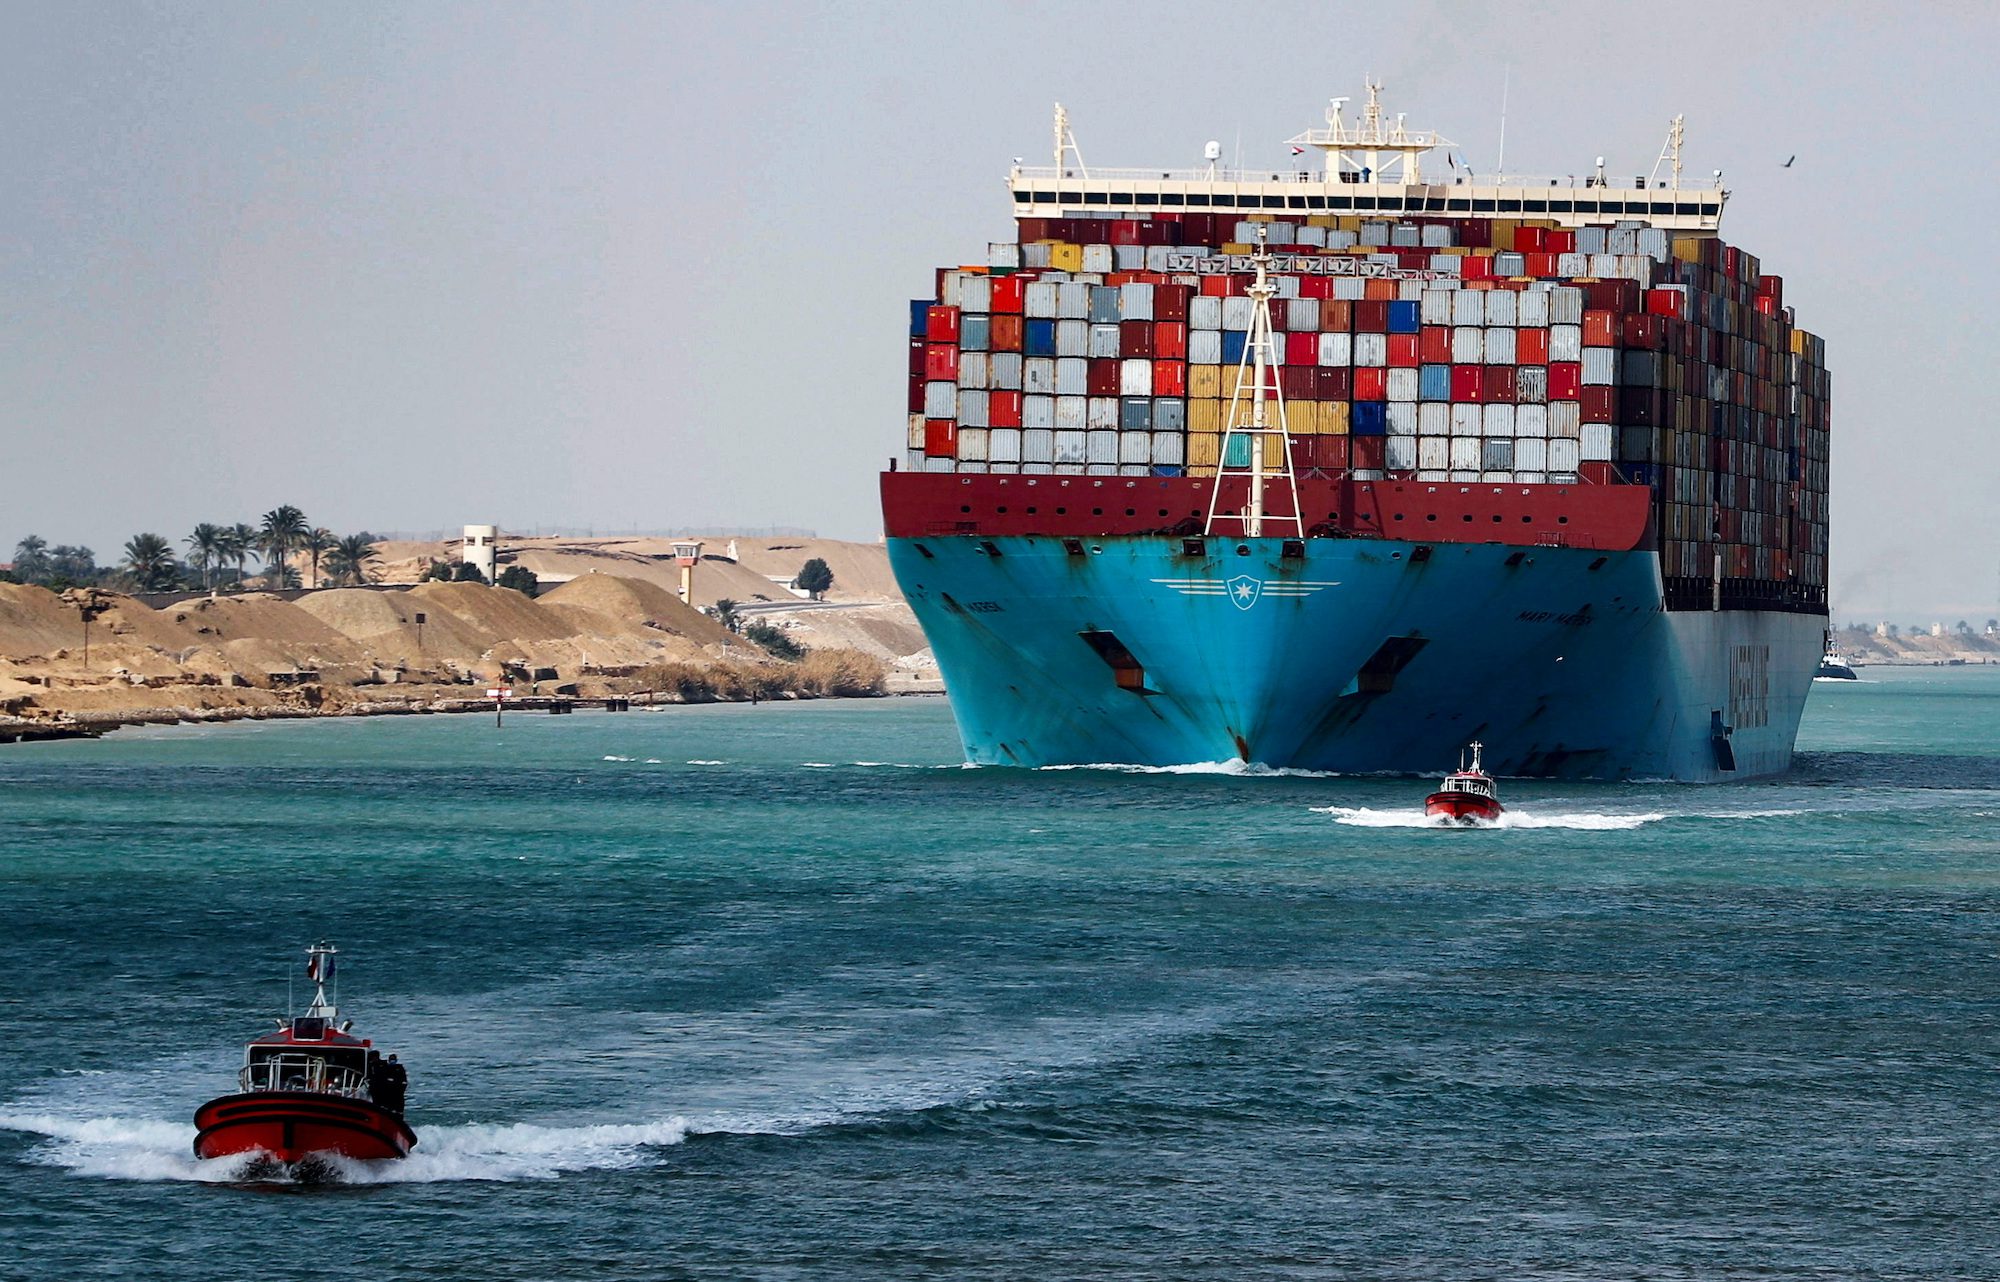 Suez Canal Open to Foreign Investment, But Will Keep Sovereignty Protected